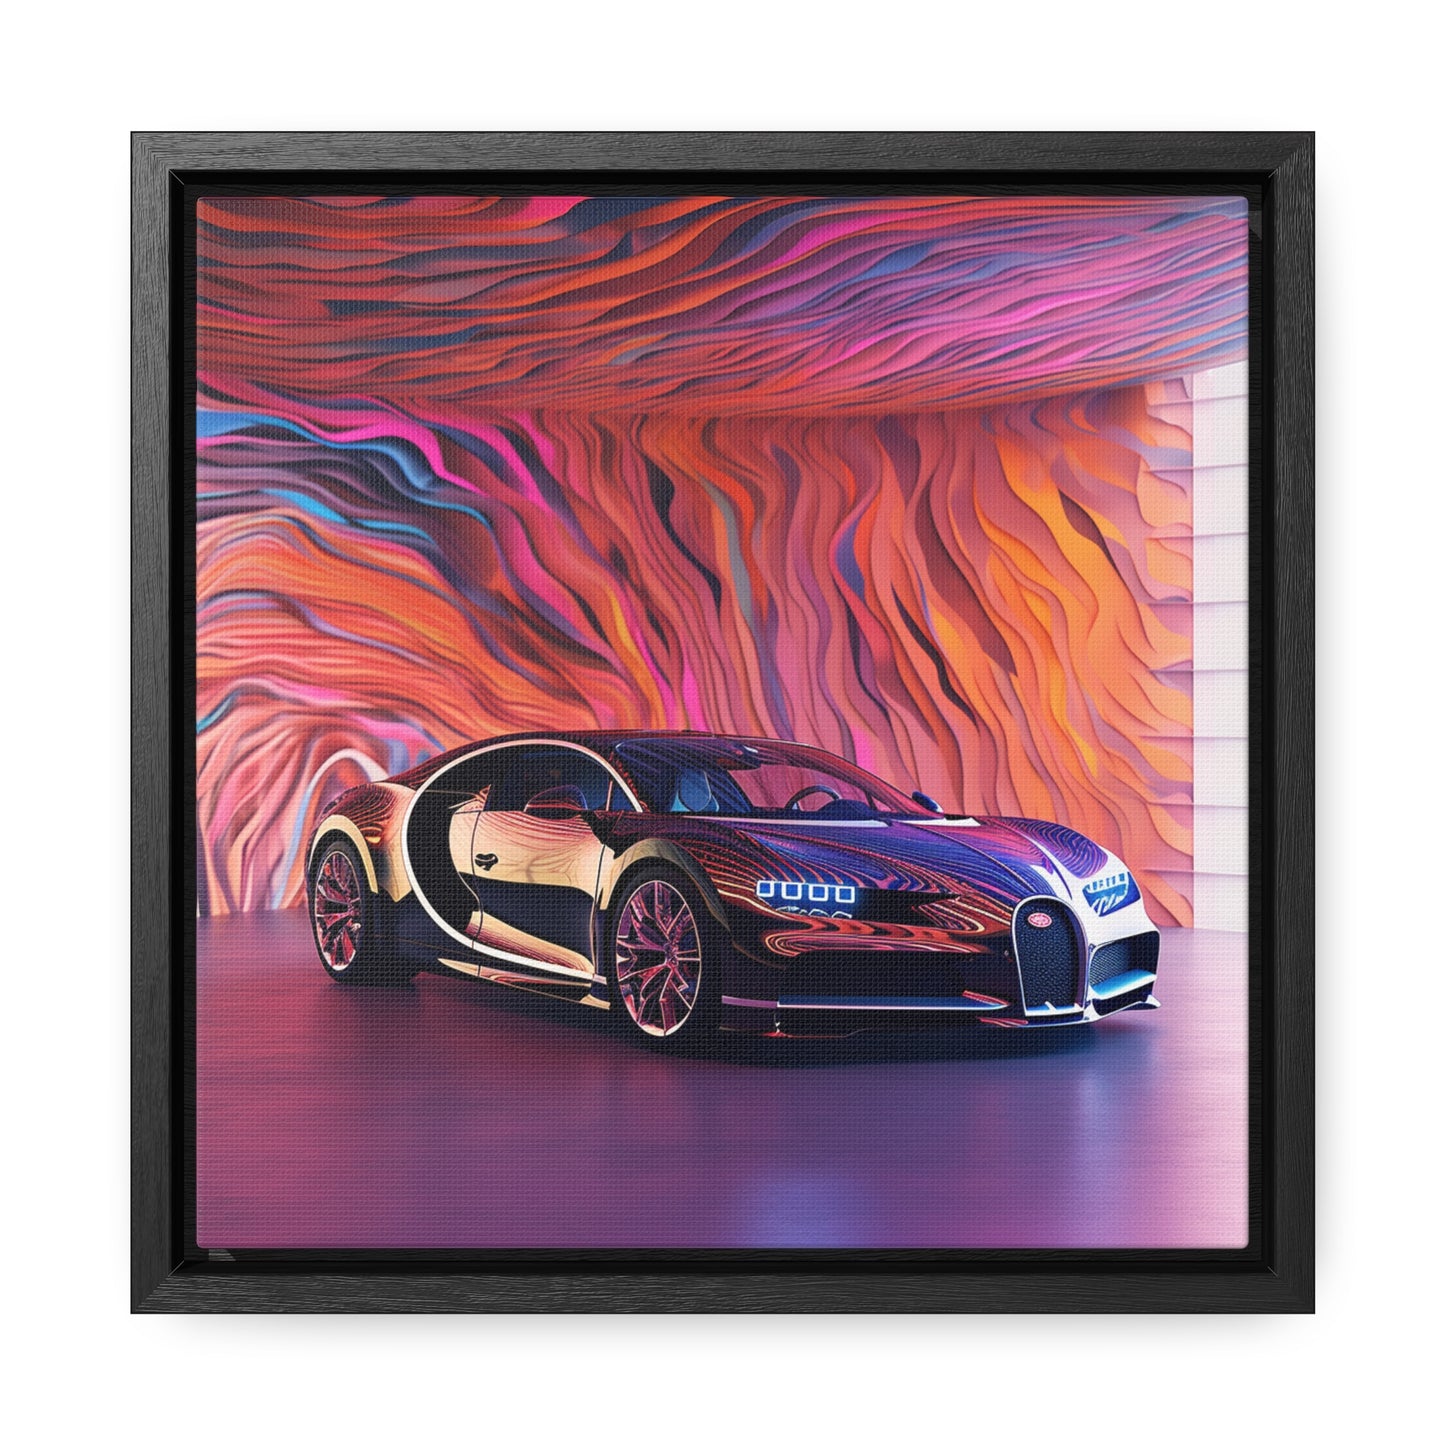 Gallery Canvas Wraps, Square Frame Bugatti Abstract Flair 4